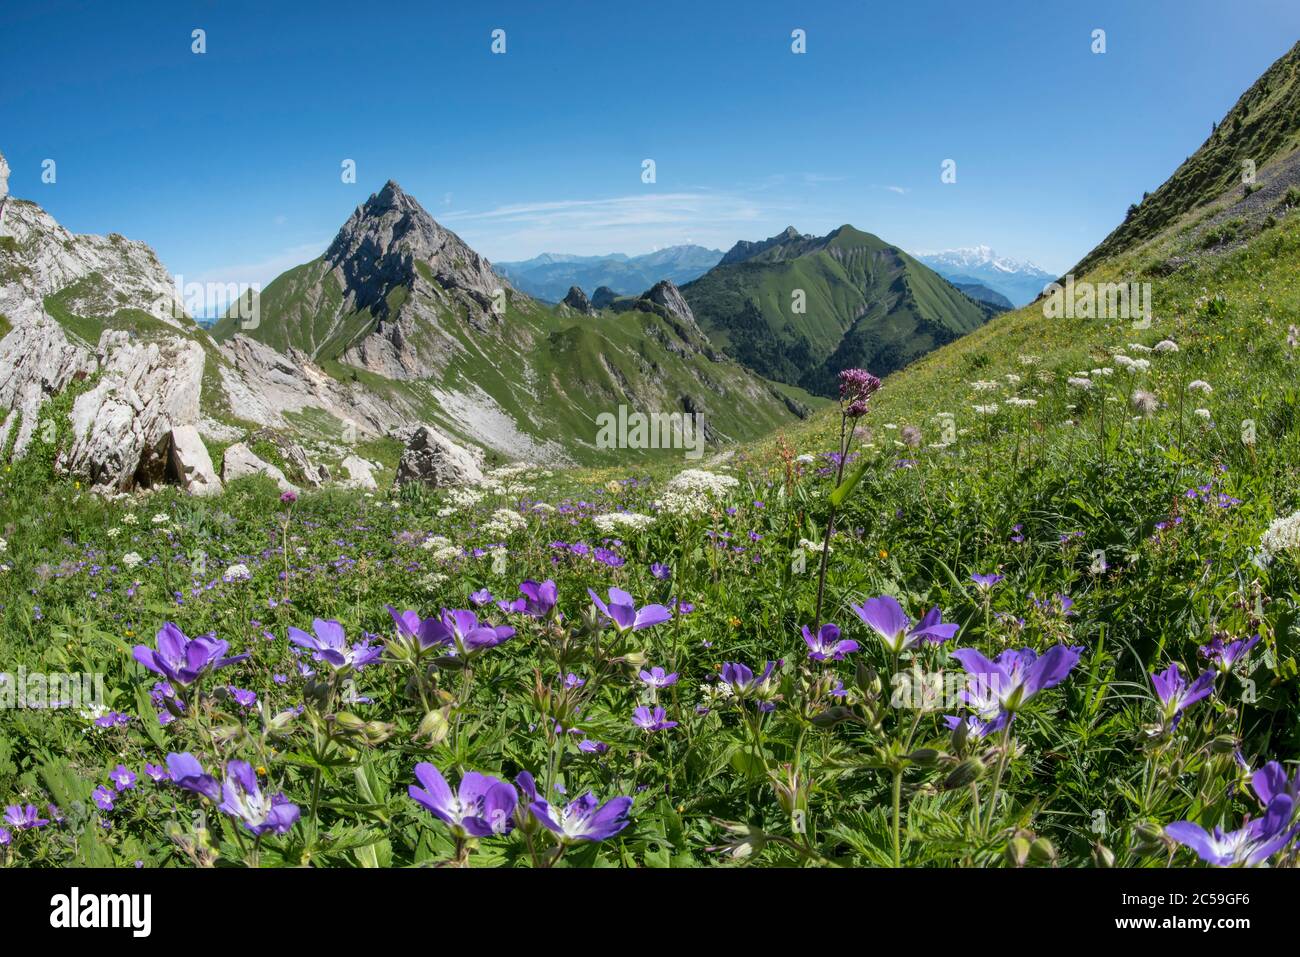 France, Savoie, massif of the Bauges regional natural park, hike to the mount de la Coche, from the col de la Coche view of the Arcalod and Chaurionde geranium flowers in the foreground Stock Photo